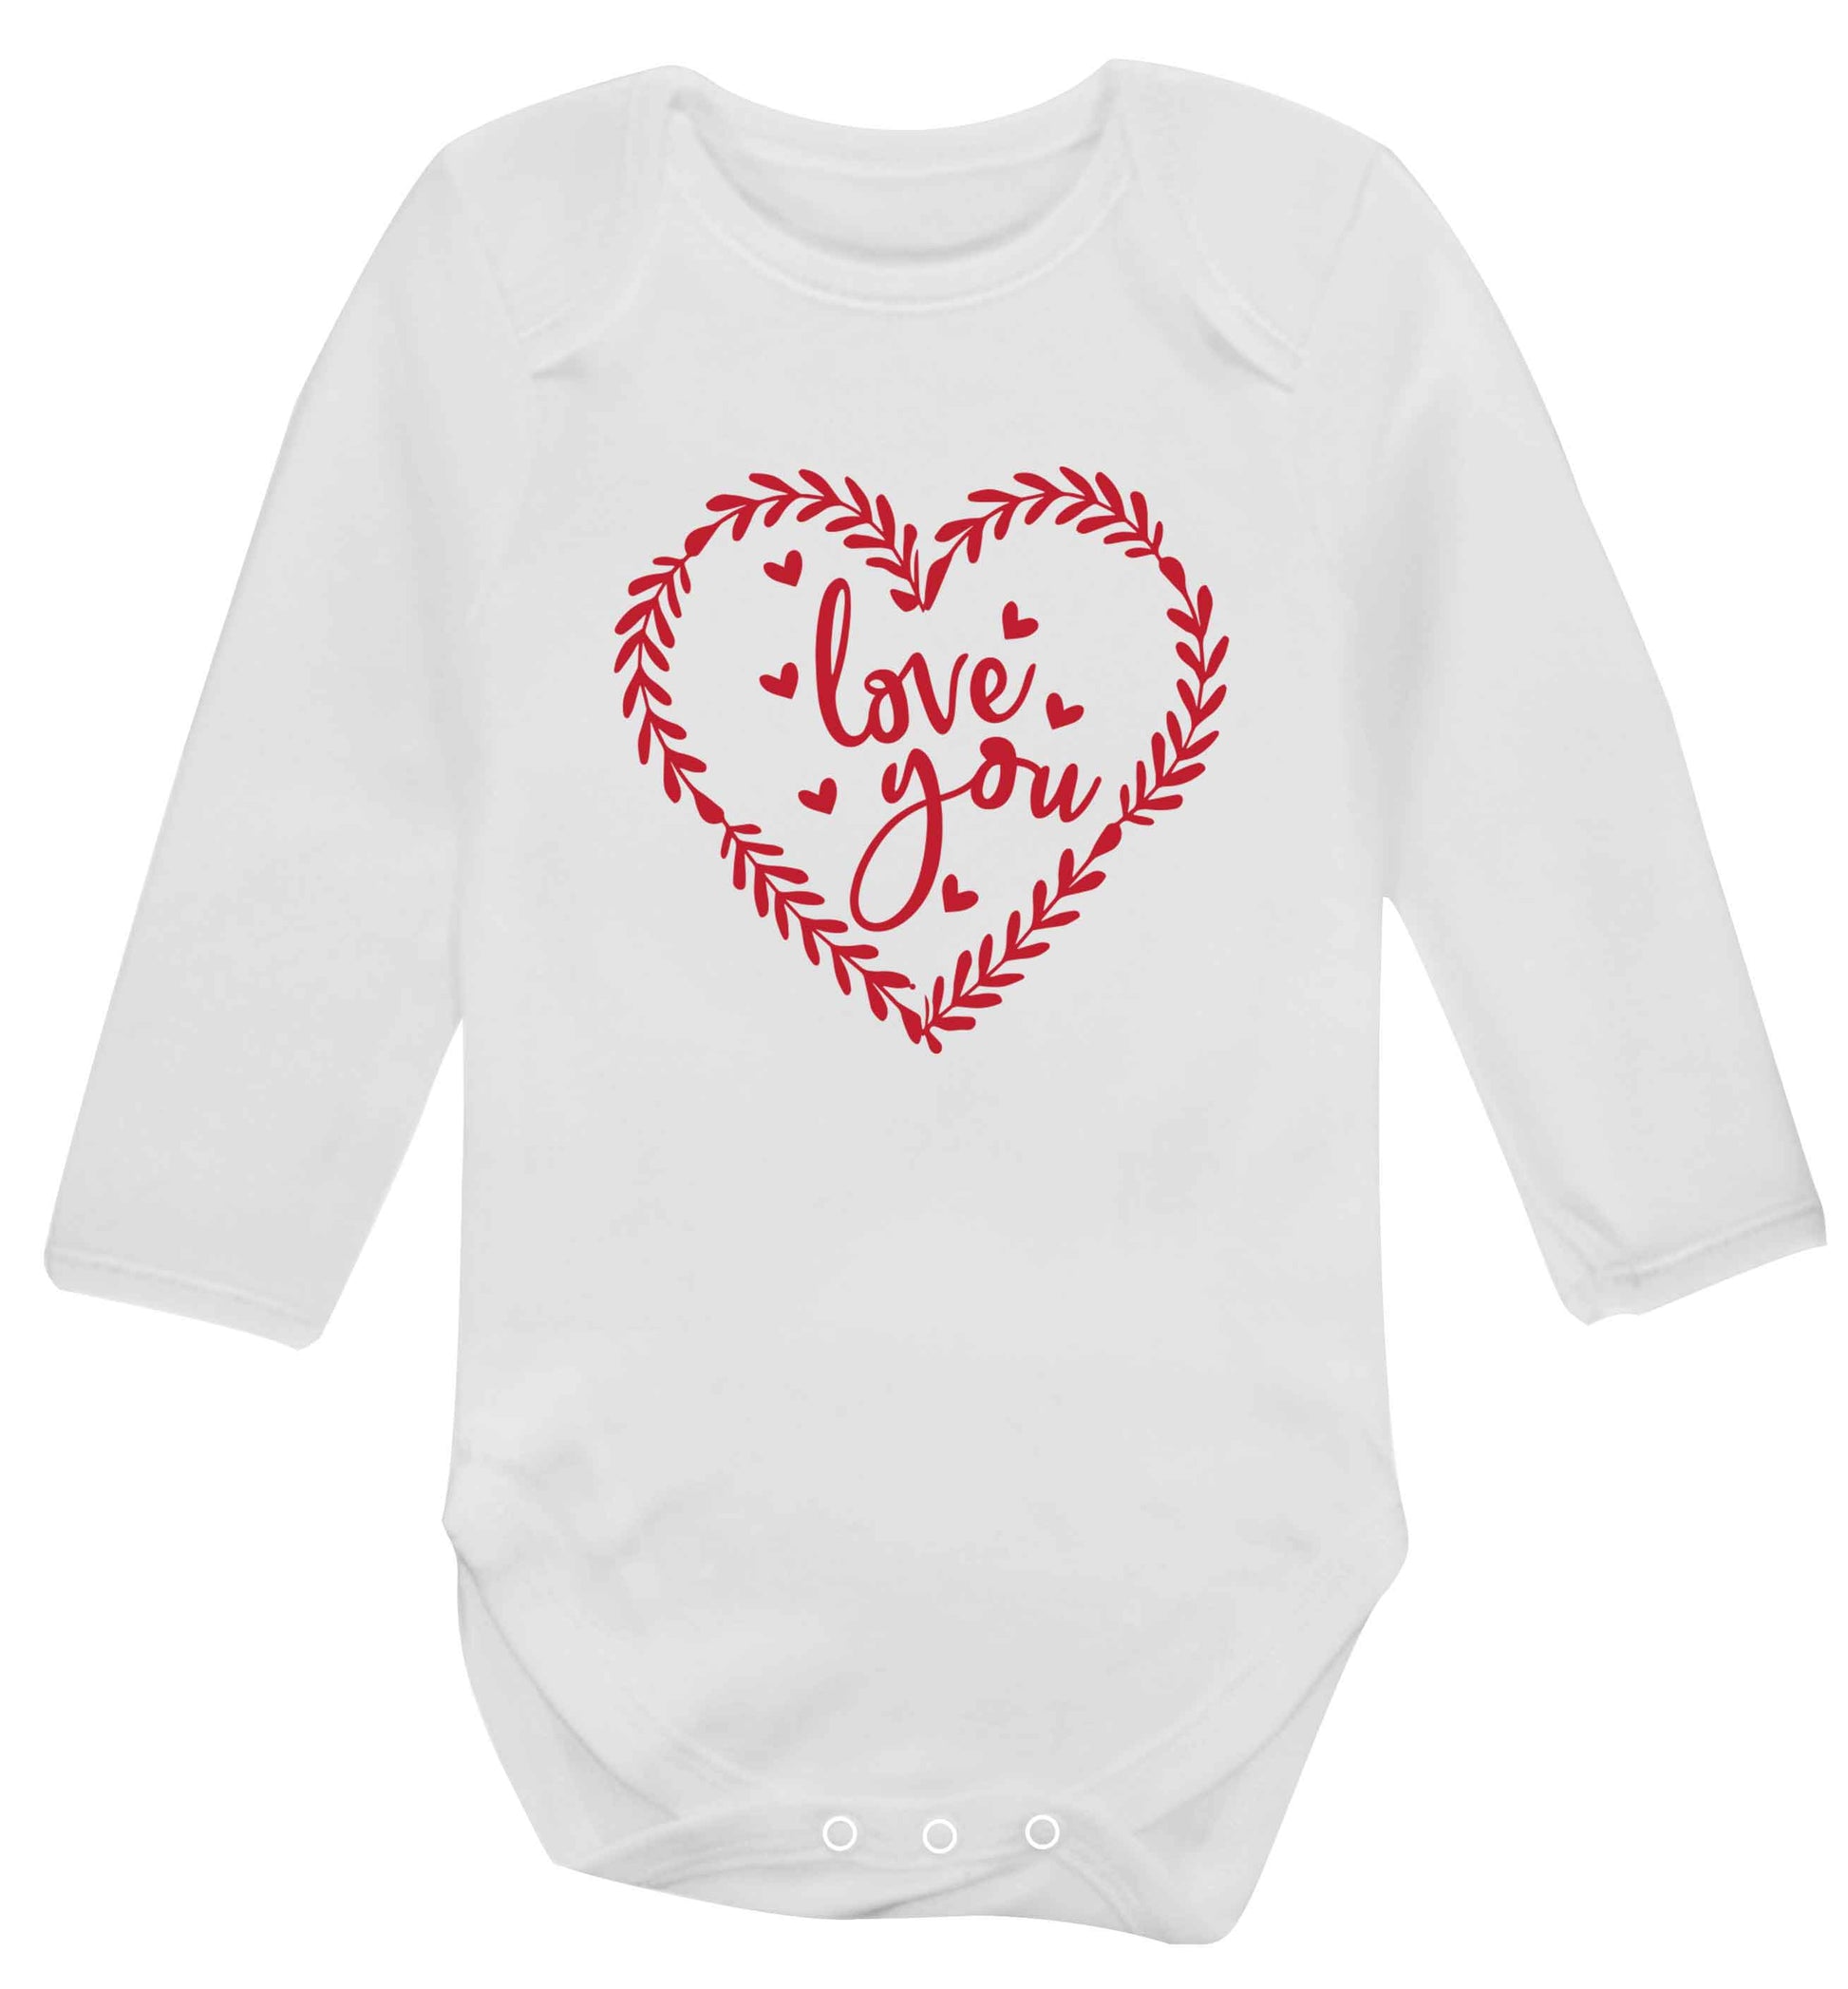 Love you baby vest long sleeved white 6-12 months